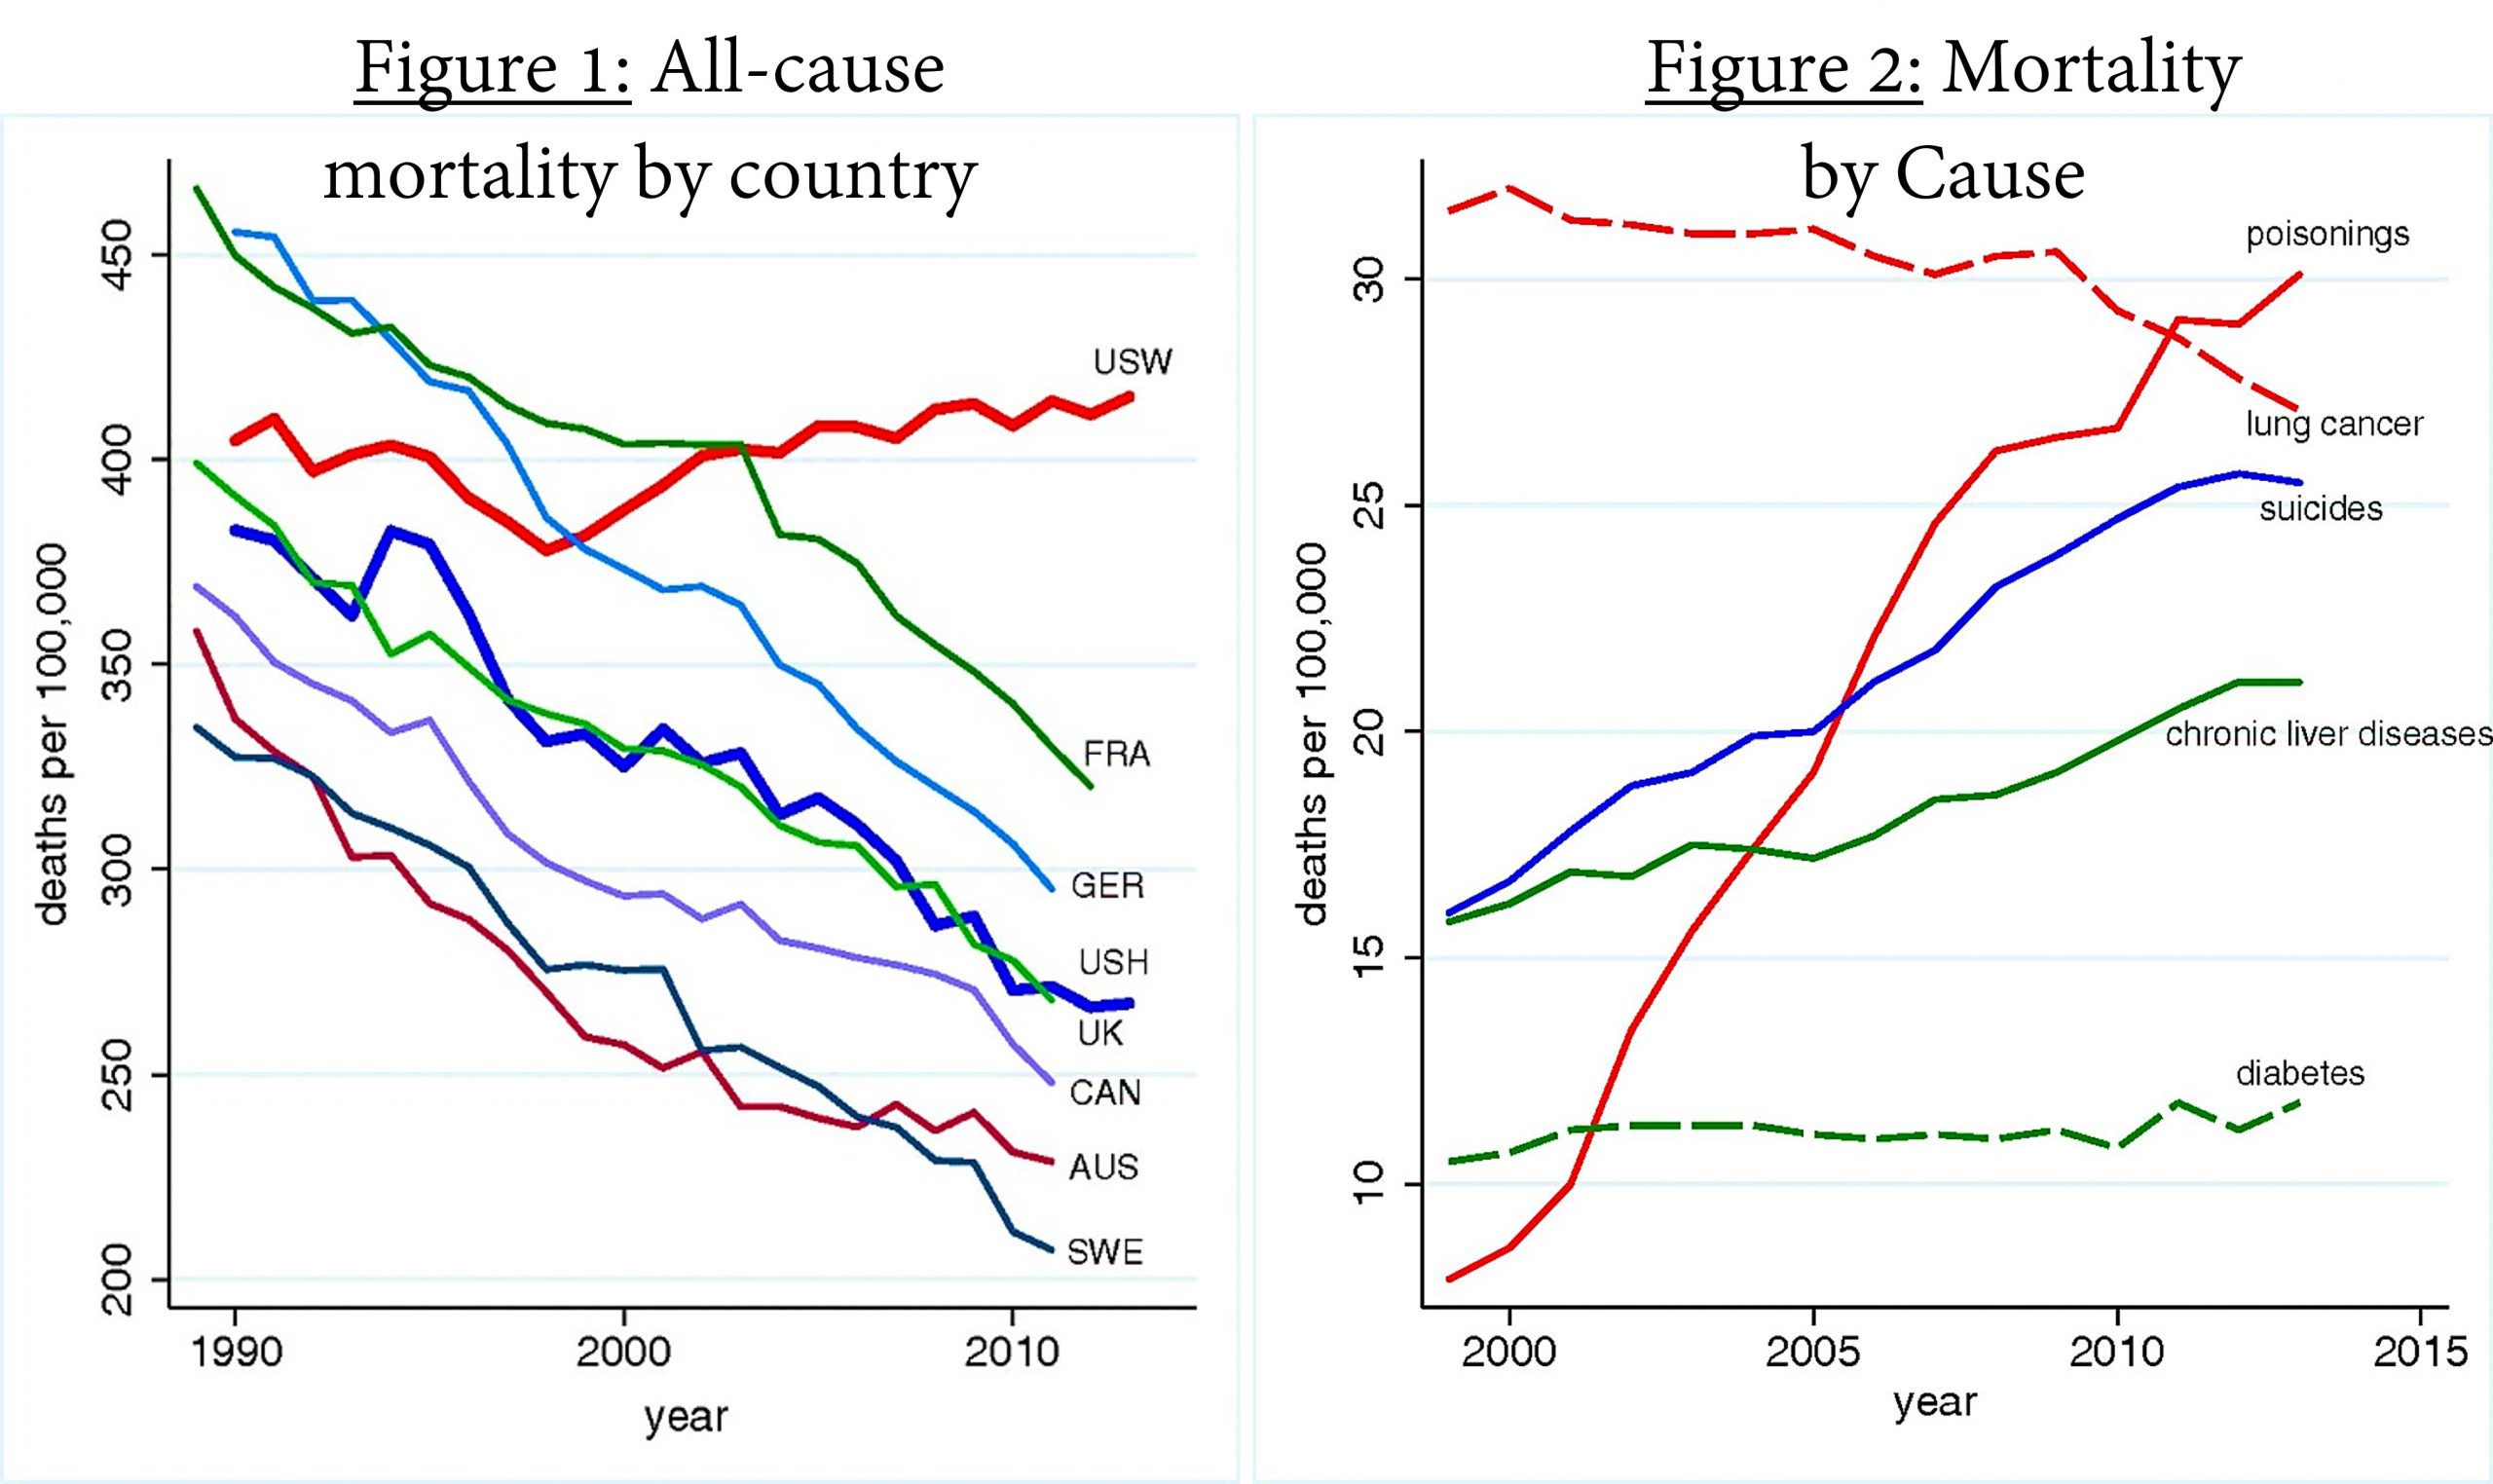 The first figure shows the mortality rate for adults ages 45-54 declining between 1990 and 210 for France, Germany, the United Kingdom, Canada, Australia, Sweden, and American Hispanic persons. However, mortality for American Whites rose sharply between the late 1990s and what looks like 2004, after which it went up and down slightly, but trending upward, until the last dates shown in the image, approximately 2012.The second Figure shows deaths per 100,000 for White Americans ages 45-54 from various causes, between the late 1990s and about 2013. Deaths from lung cancer trended down. Diabetes was up slightly over the period. Poisonings a.k.a drug overdoses rose steeply. Also increasing were suicides and deaths from chronic liver disease (correlated with the incidence of alcoholism).